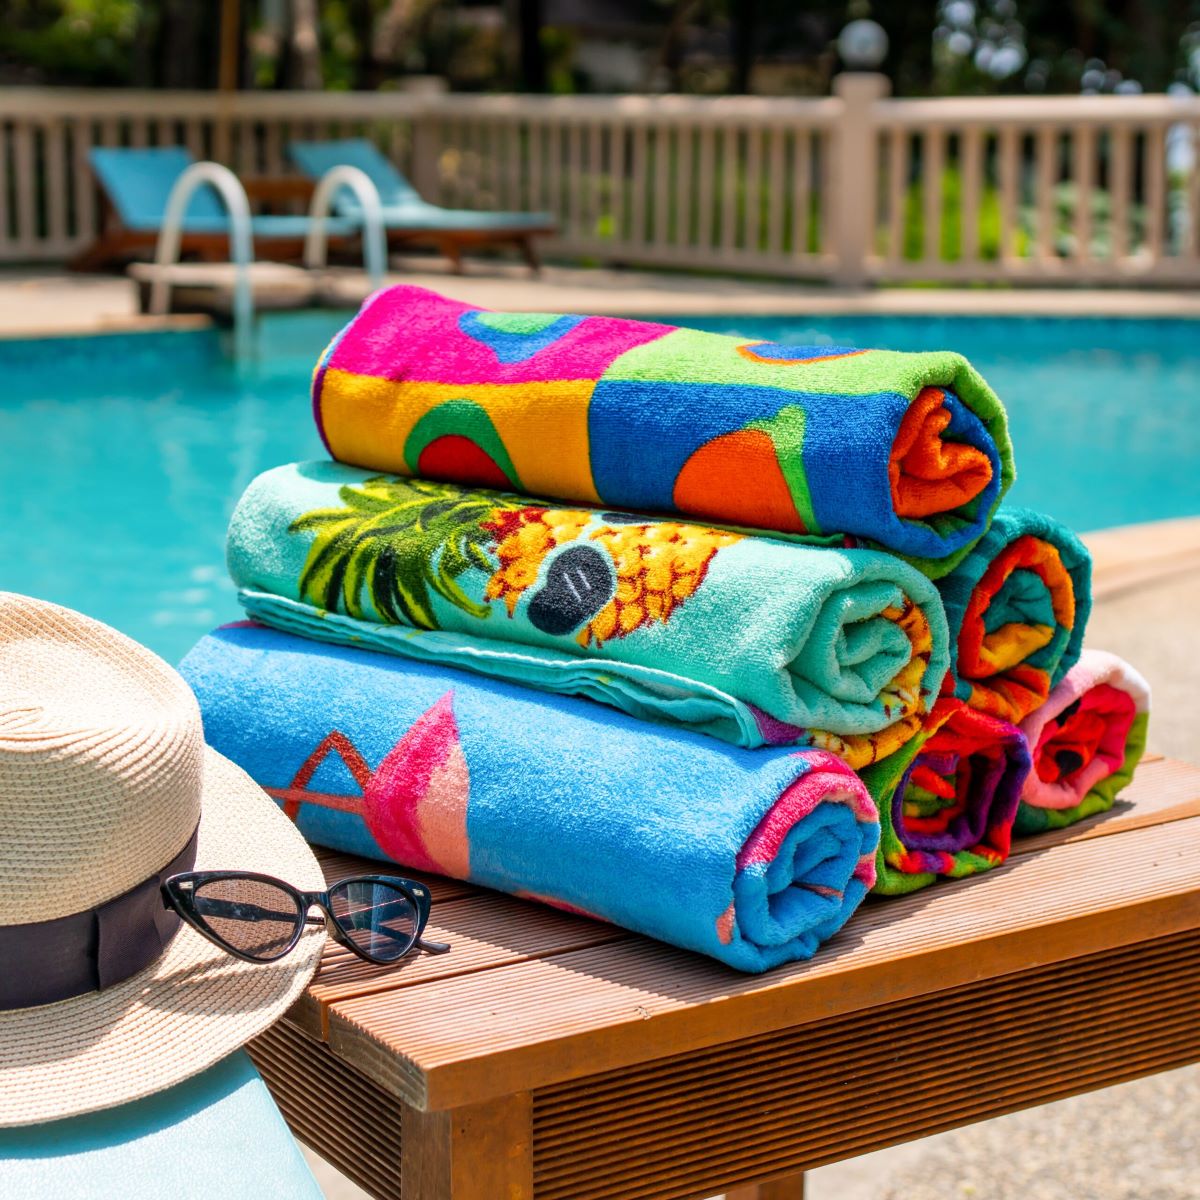 How To Store Pool Towels